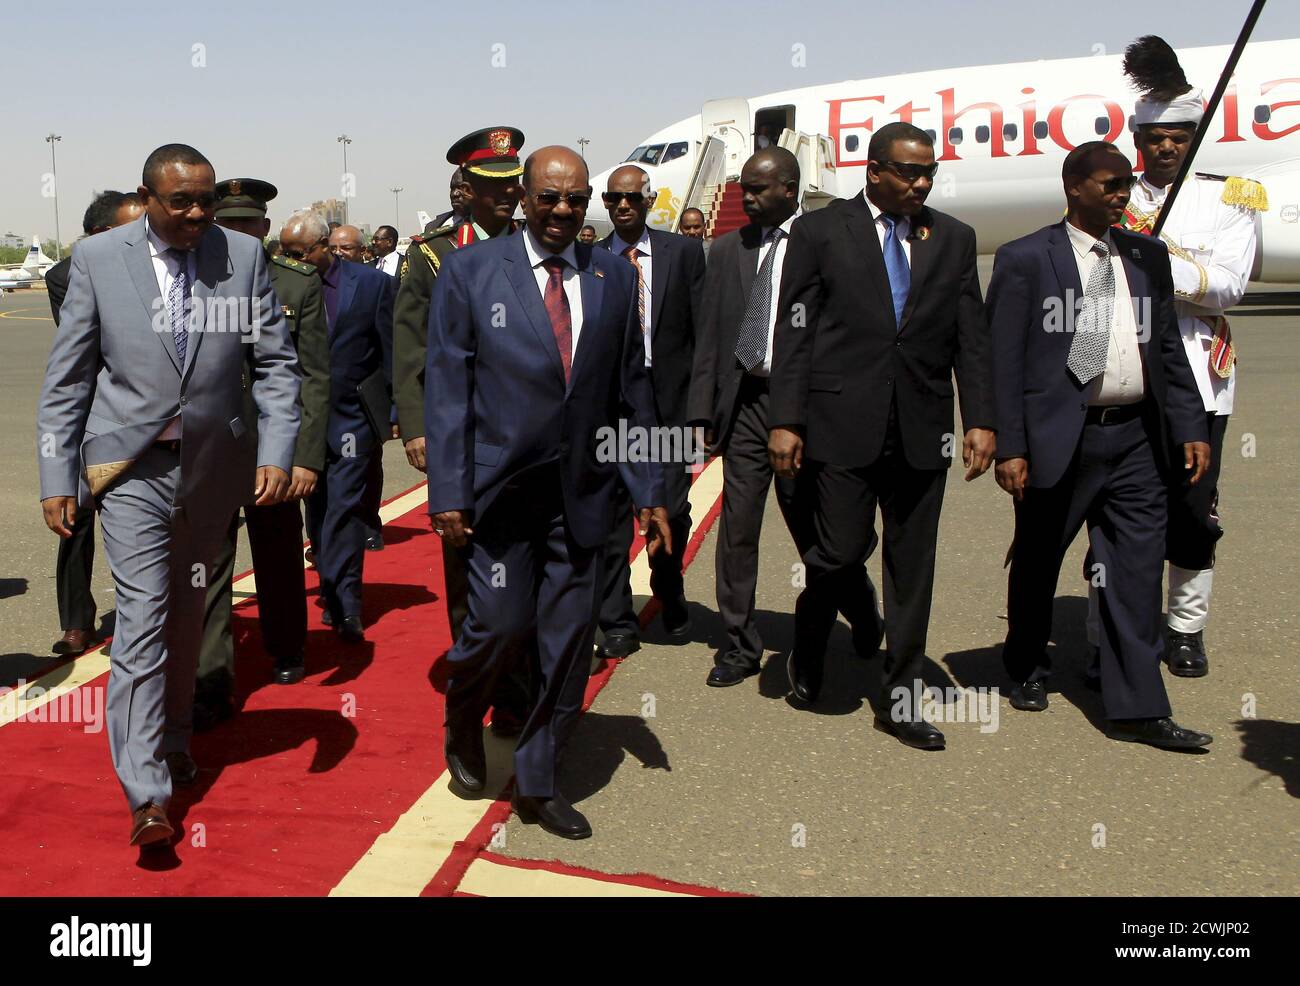 Sudanese President Omar Hassan al-Bashir (C) welcomes Ethiopian Prime Minister Hailemariam Desalegn (L) at Khartoum Airport, ahead of their signing of an Agreement on Declaration of Principles between Sudan, Egypt and Ethiopia on the Grand Ethiopian Renaissance Dam Project,  in Khartoum March 23, 2015. The leaders of Egypt, Ethiopia and Sudan signed a cooperation deal on Monday over a giant Ethiopian hydroelectric dam on a tributary of the river Nile, in a bid to ease tensions over regional water supplies. The leaders said the 'declaration of principles' would pave the way for further diplomat Stock Photo